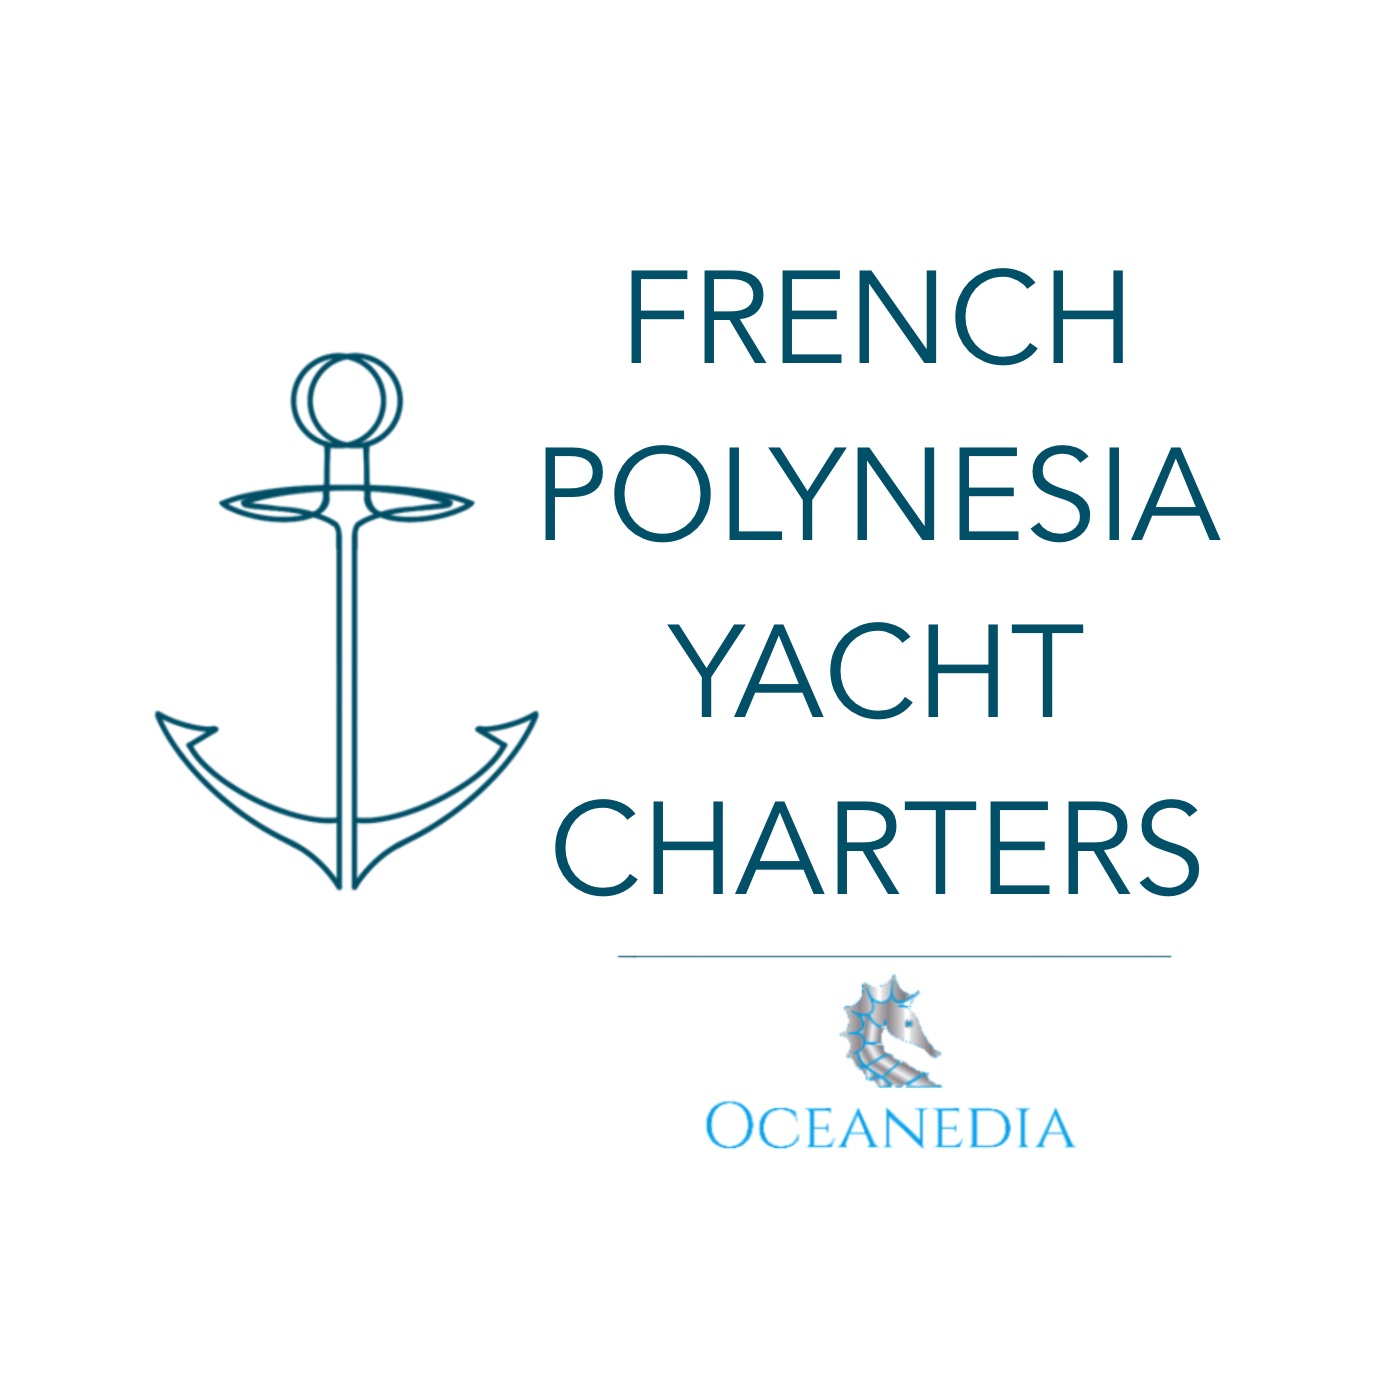 French Polynesia Yacht Charters by Oceanedia | Plan and book your sublime sailing escape now, onboard premium sailing yachts, catamarans and motor yachts.